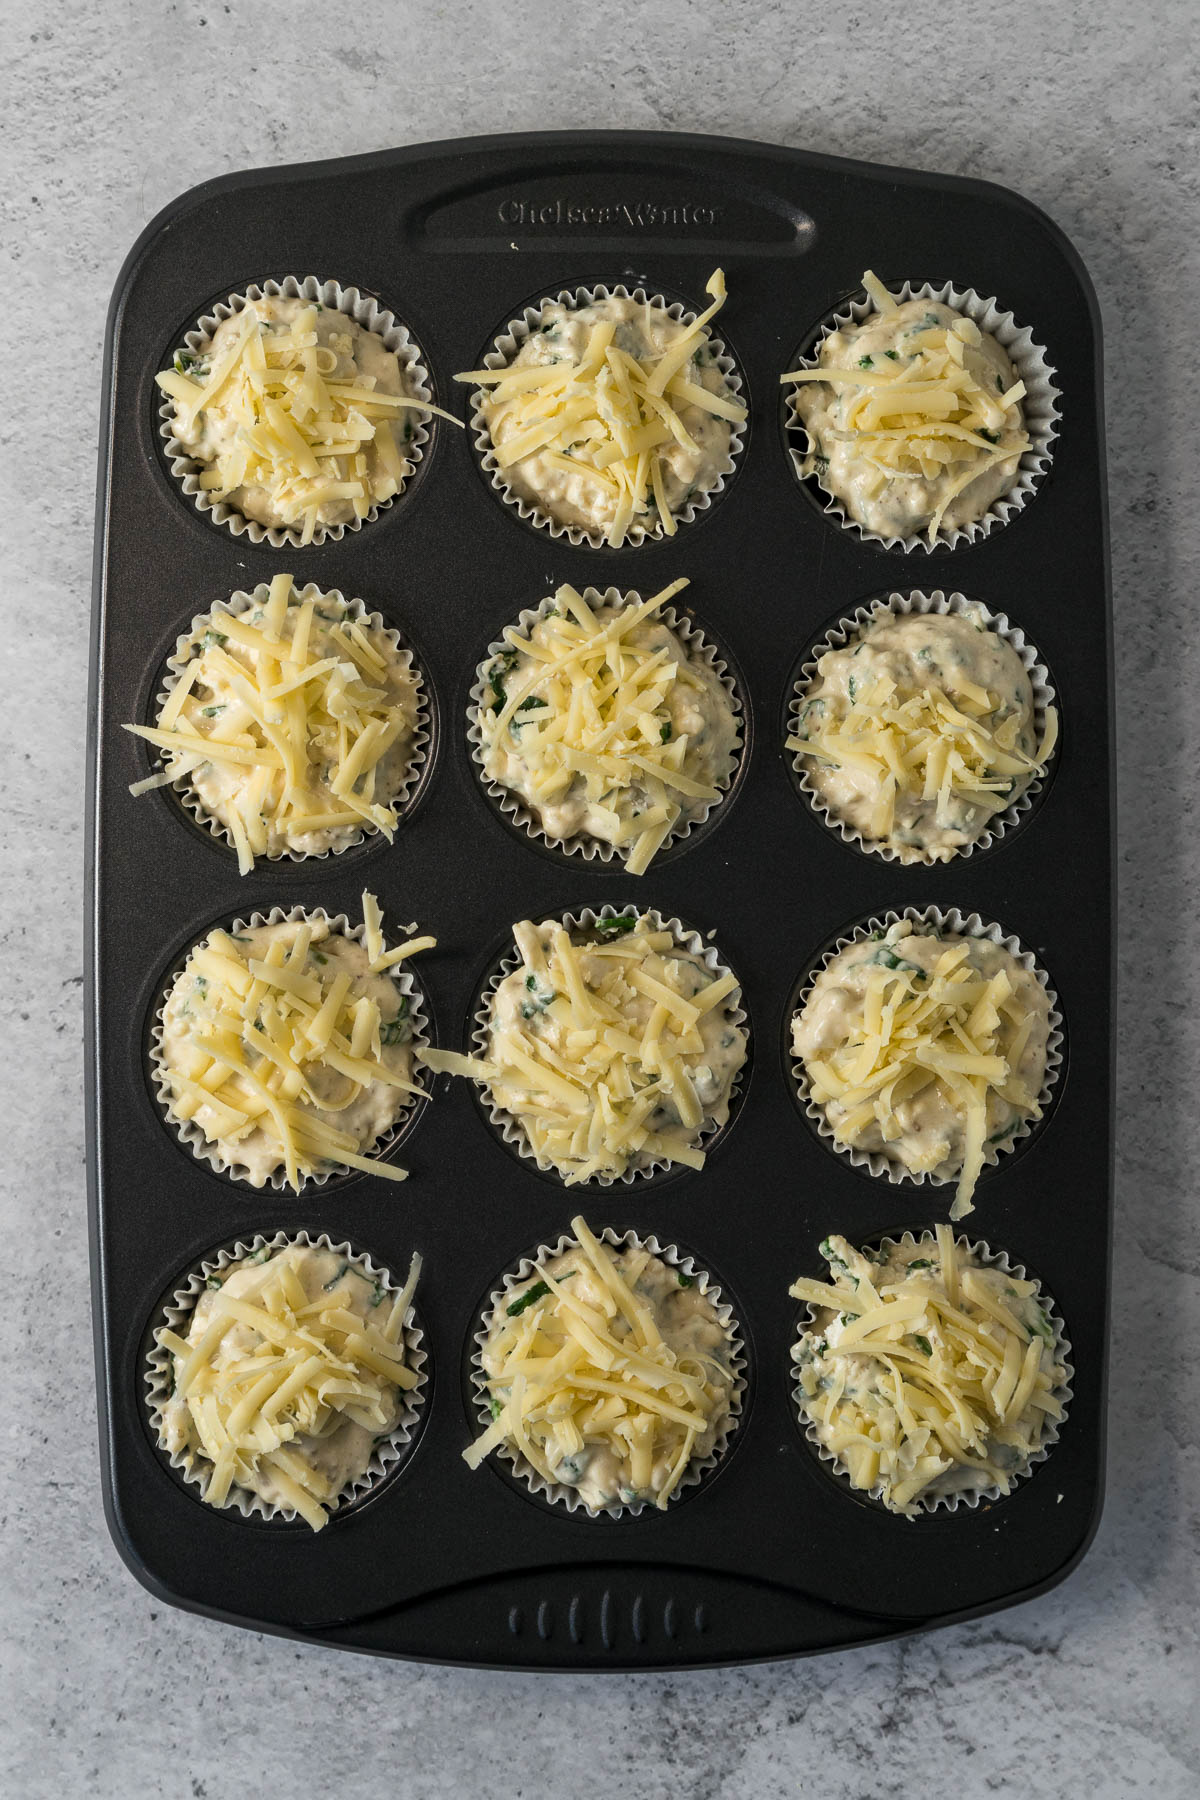 Muffin batter divided into liners and topped with cheese.